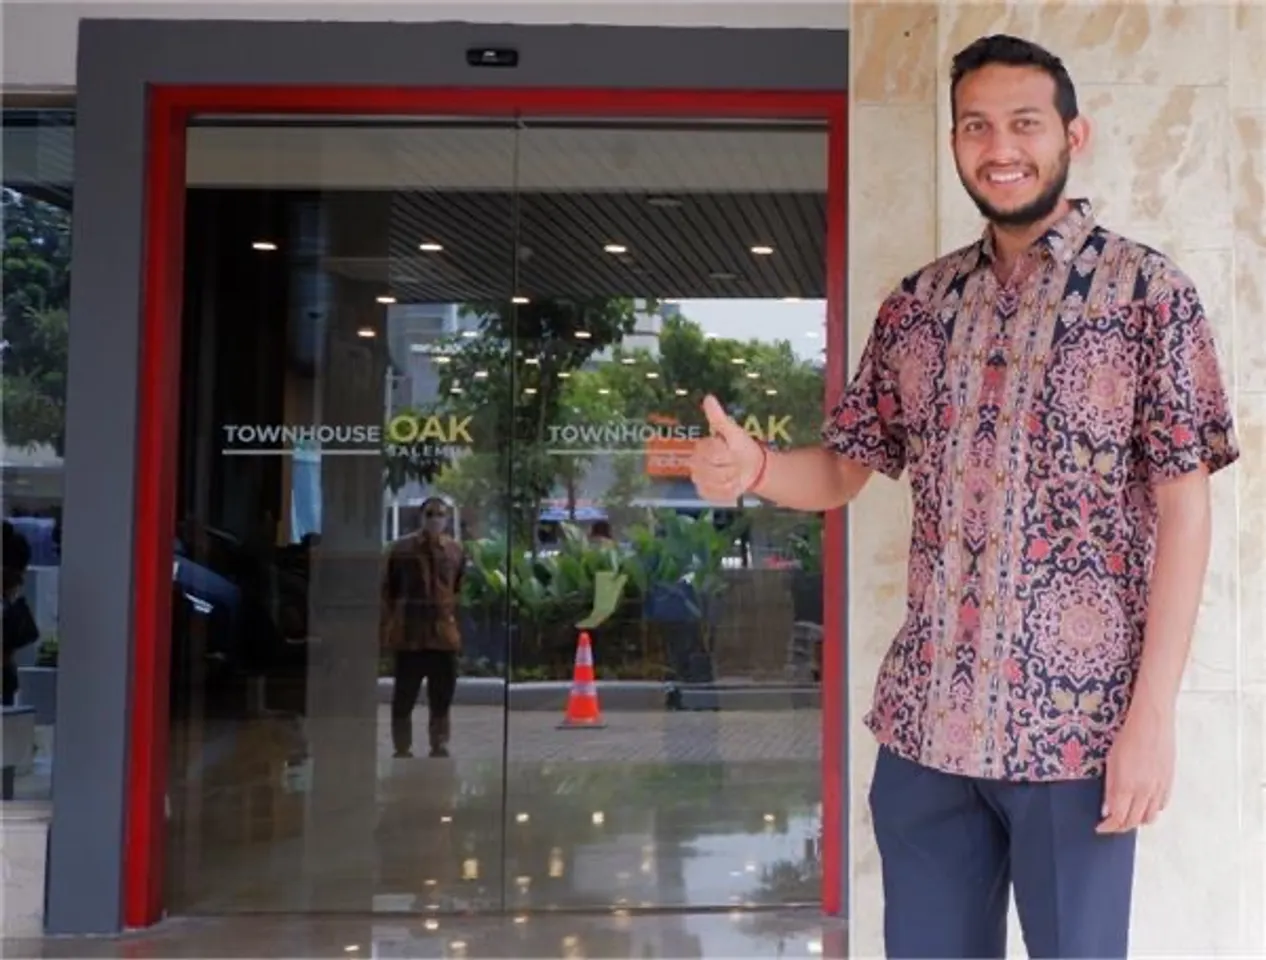 Oyo Bets Big on Indonesia; To Focus on Hospitality and Innovation